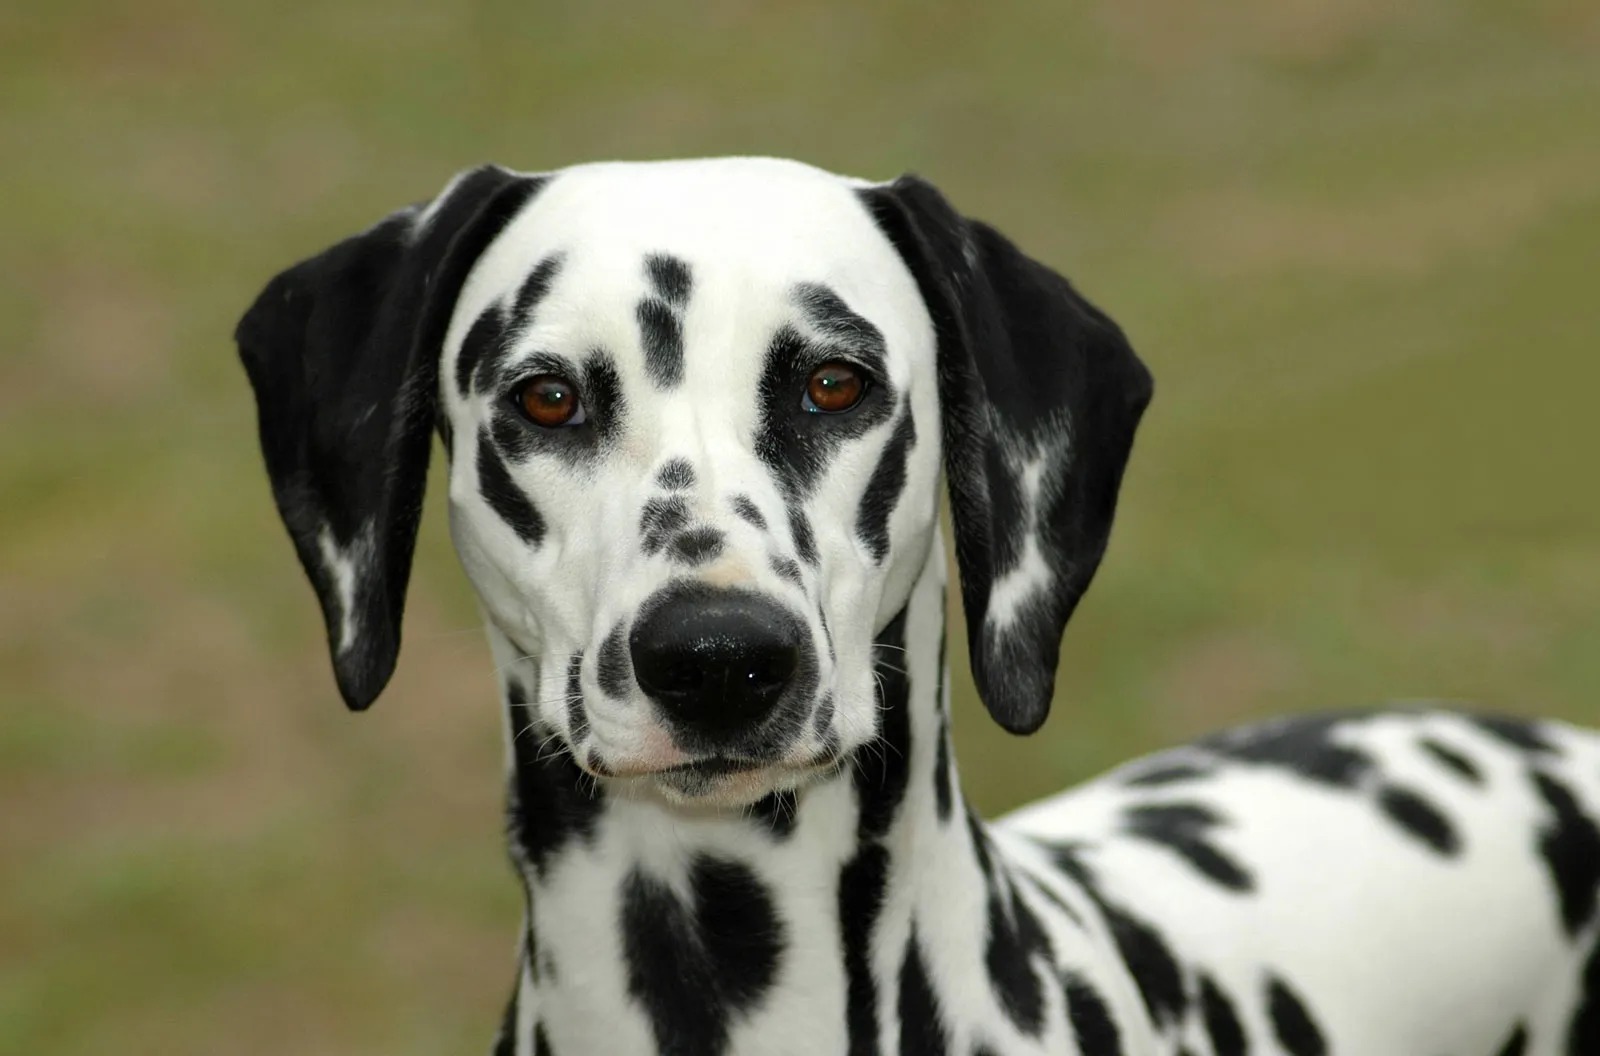 The Mysterious Disappearance Of Dalmatians: What Happened To These Iconic Dogs?